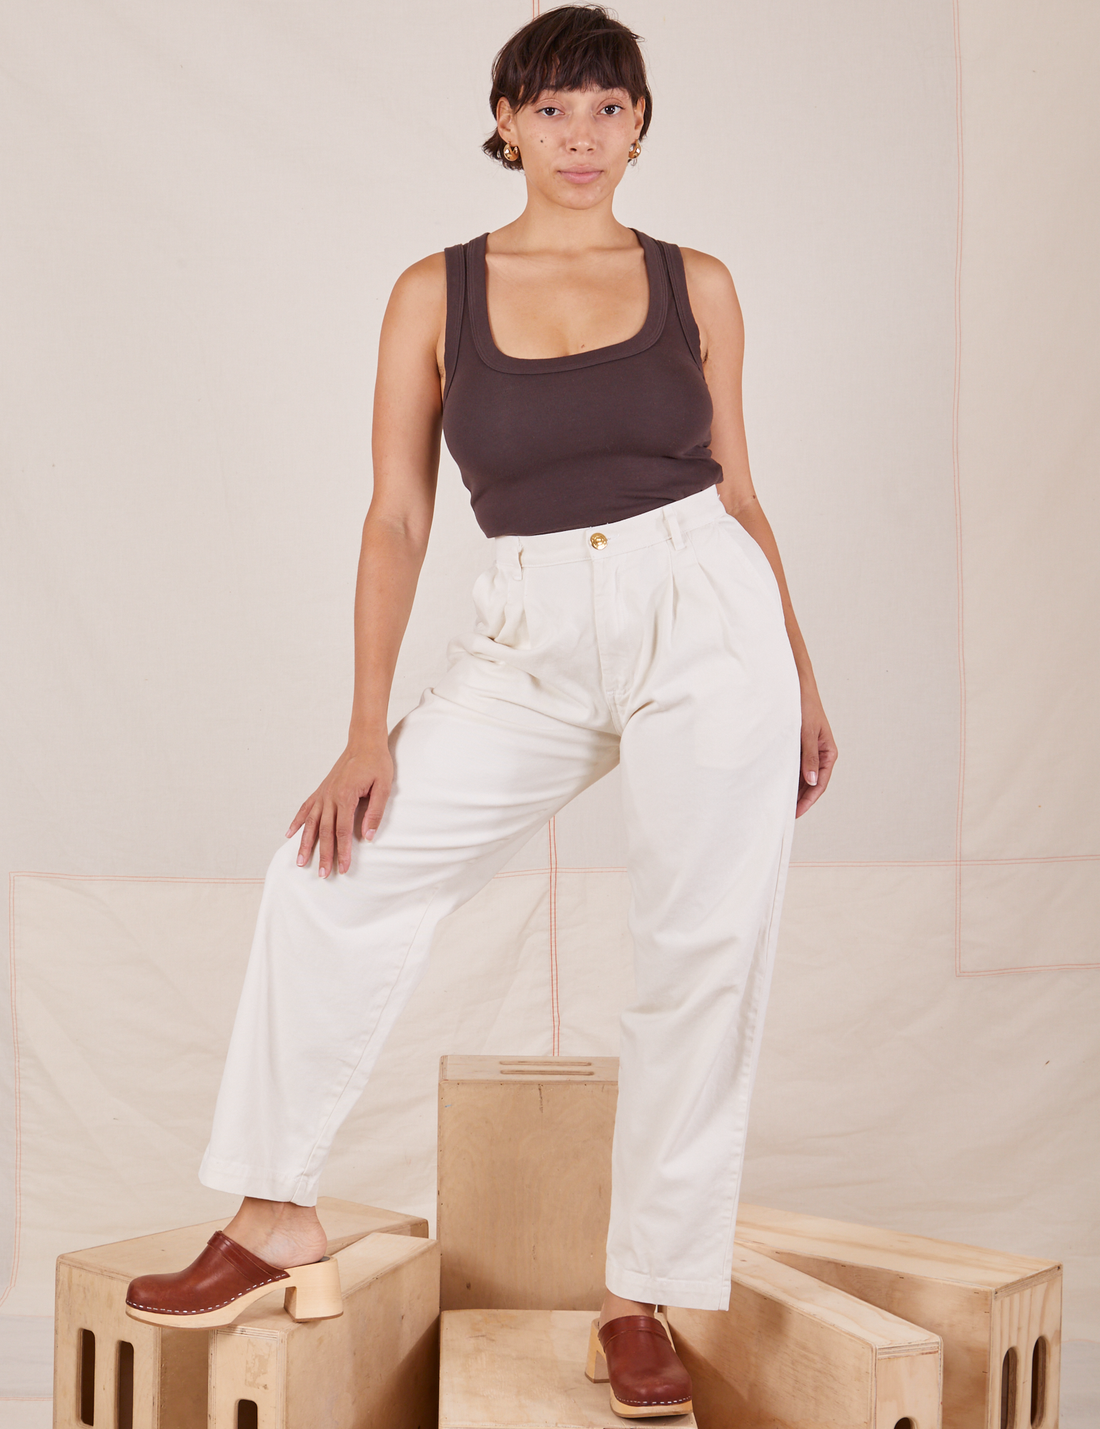 Tiara is 5'4" and wearing S Heavyweight Trousers in Vintage Off-White paired with espresso brown Cropped Tank Top.